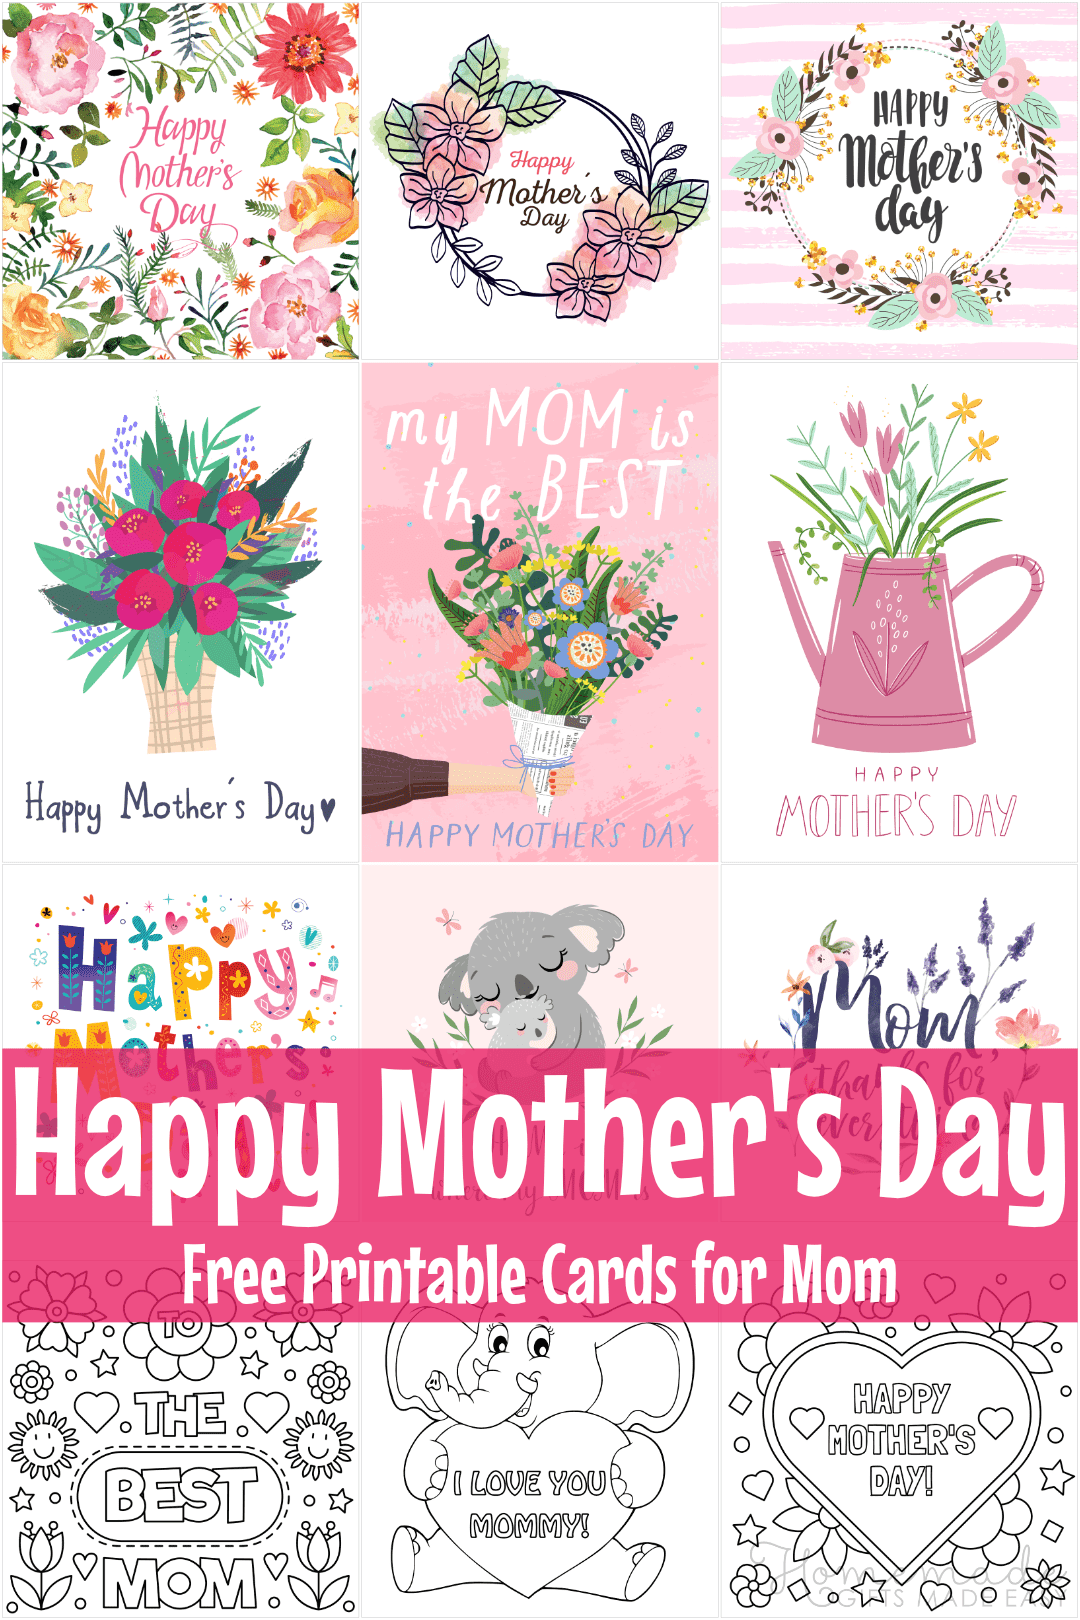 https://www.homemade-gifts-made-easy.com/image-files/free-printable-mothers-day-cards-montage-1080x1620.png